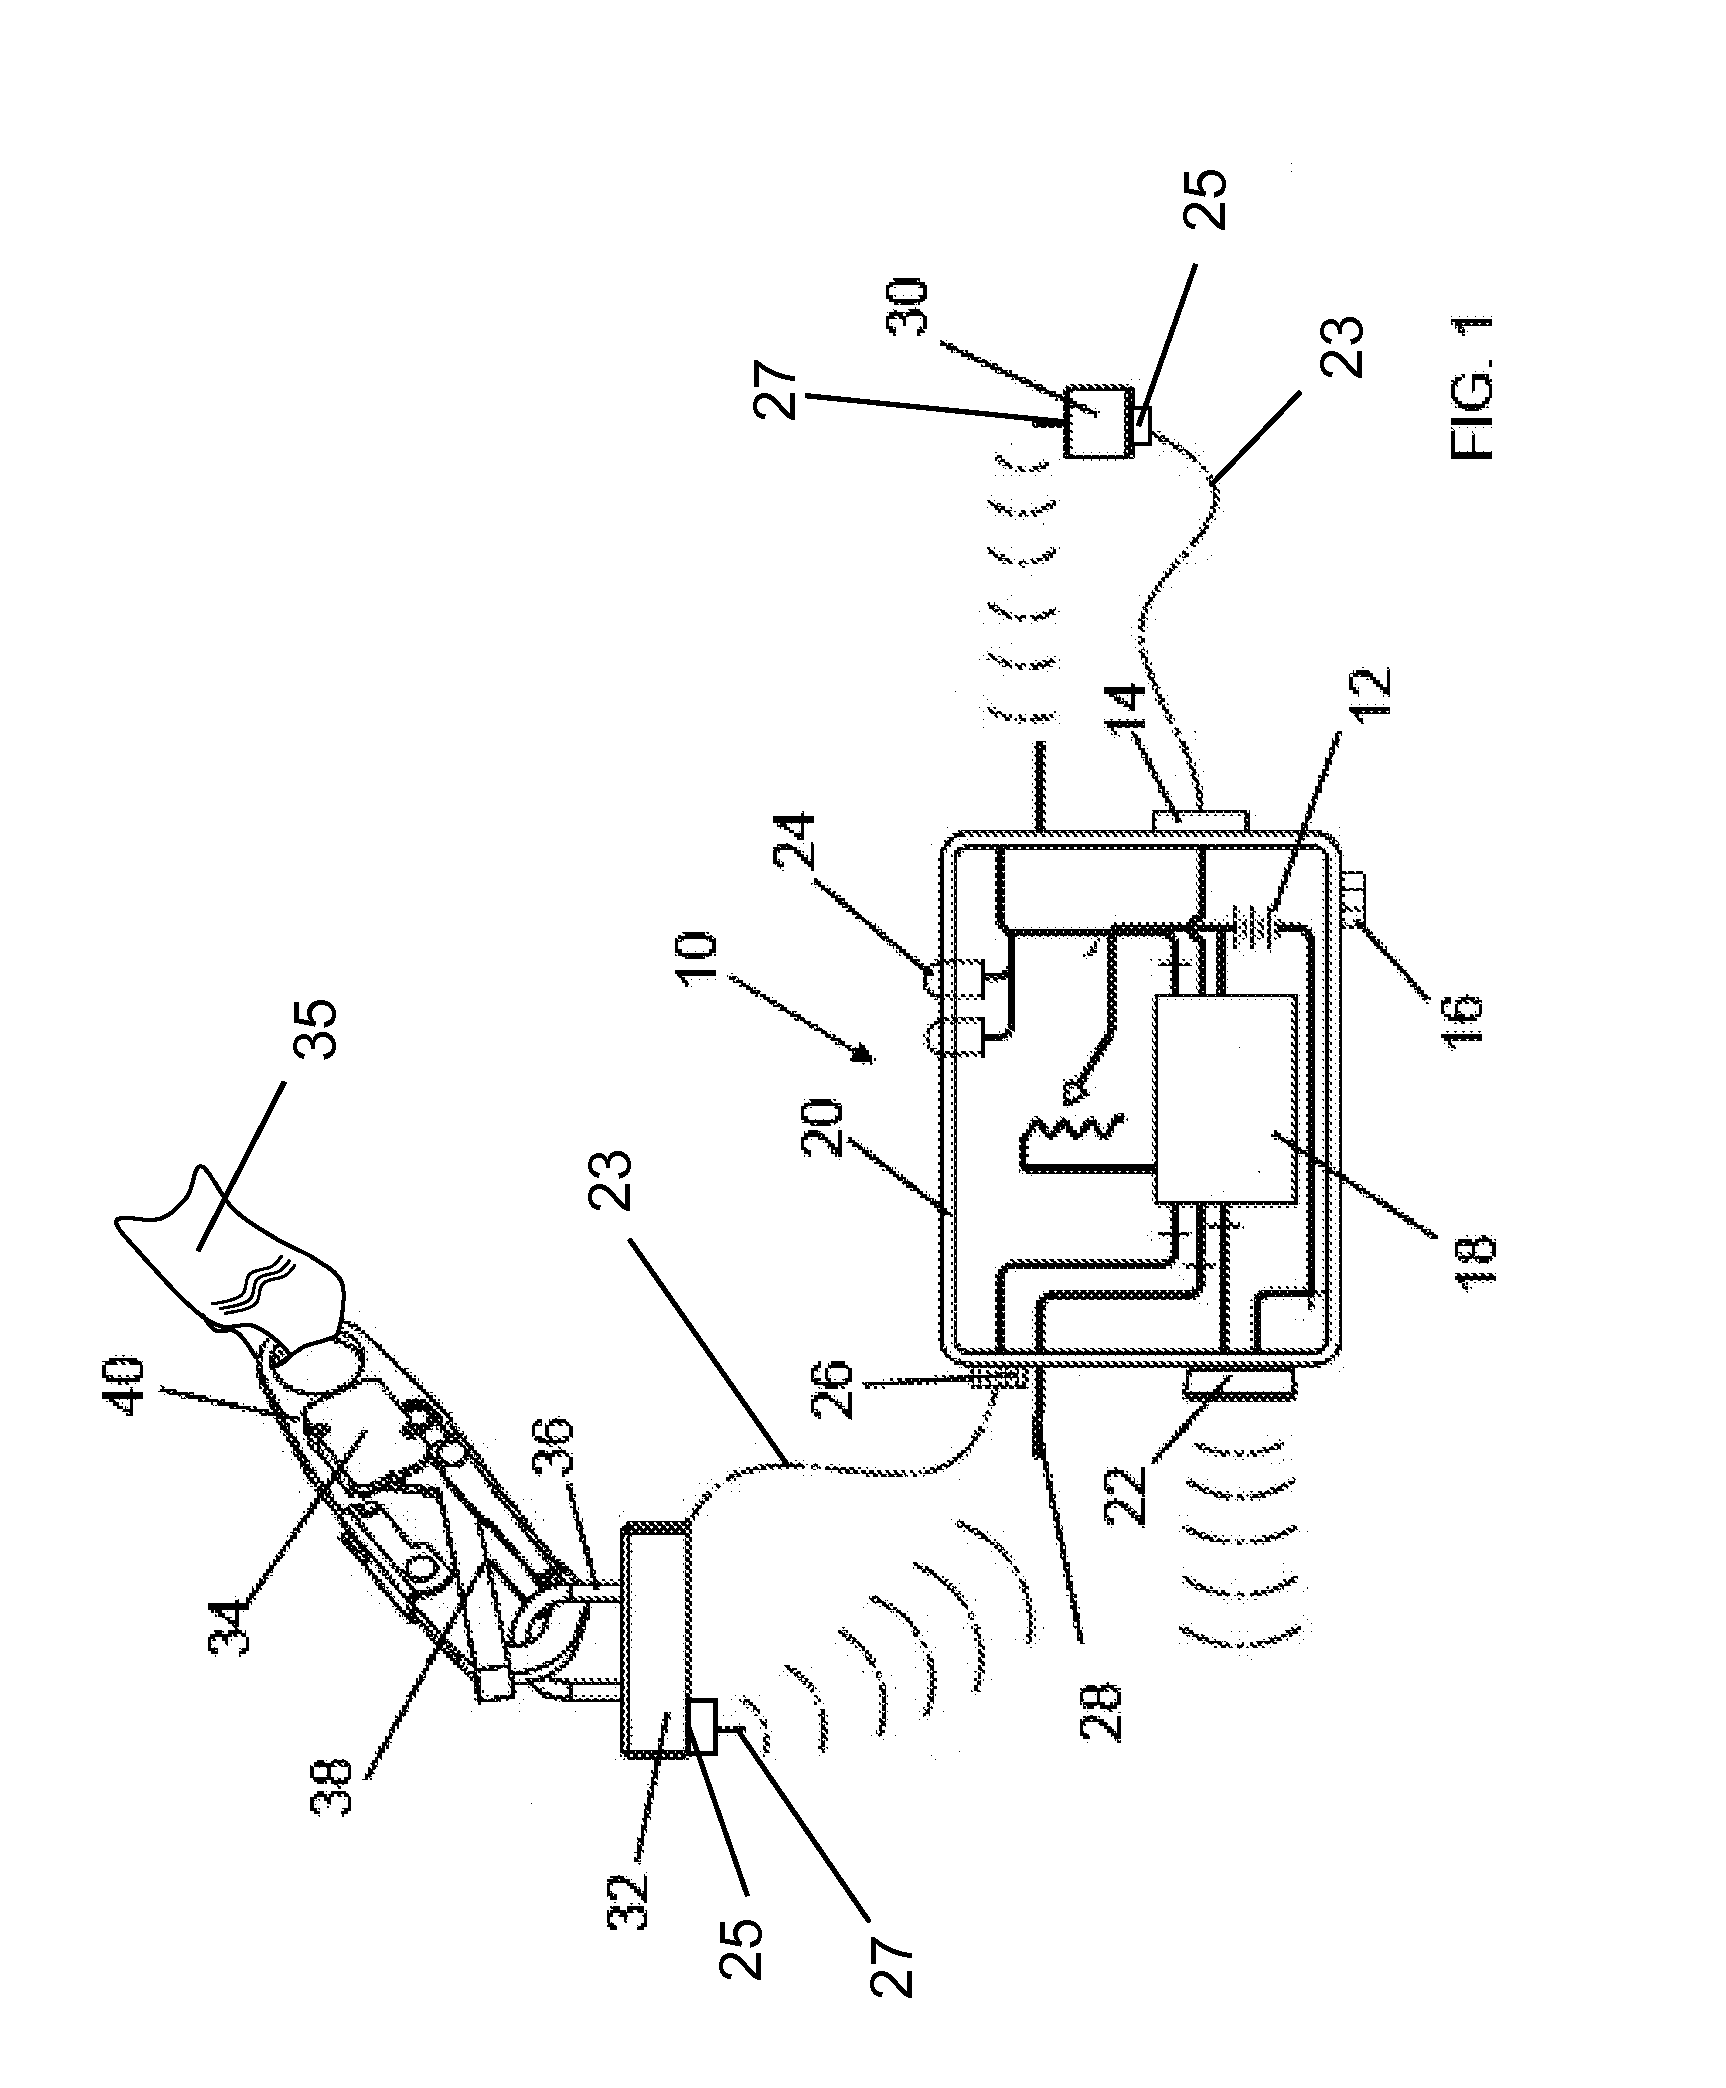 Detection and warning system utilizable in a fall arresting and prevention device and method of same